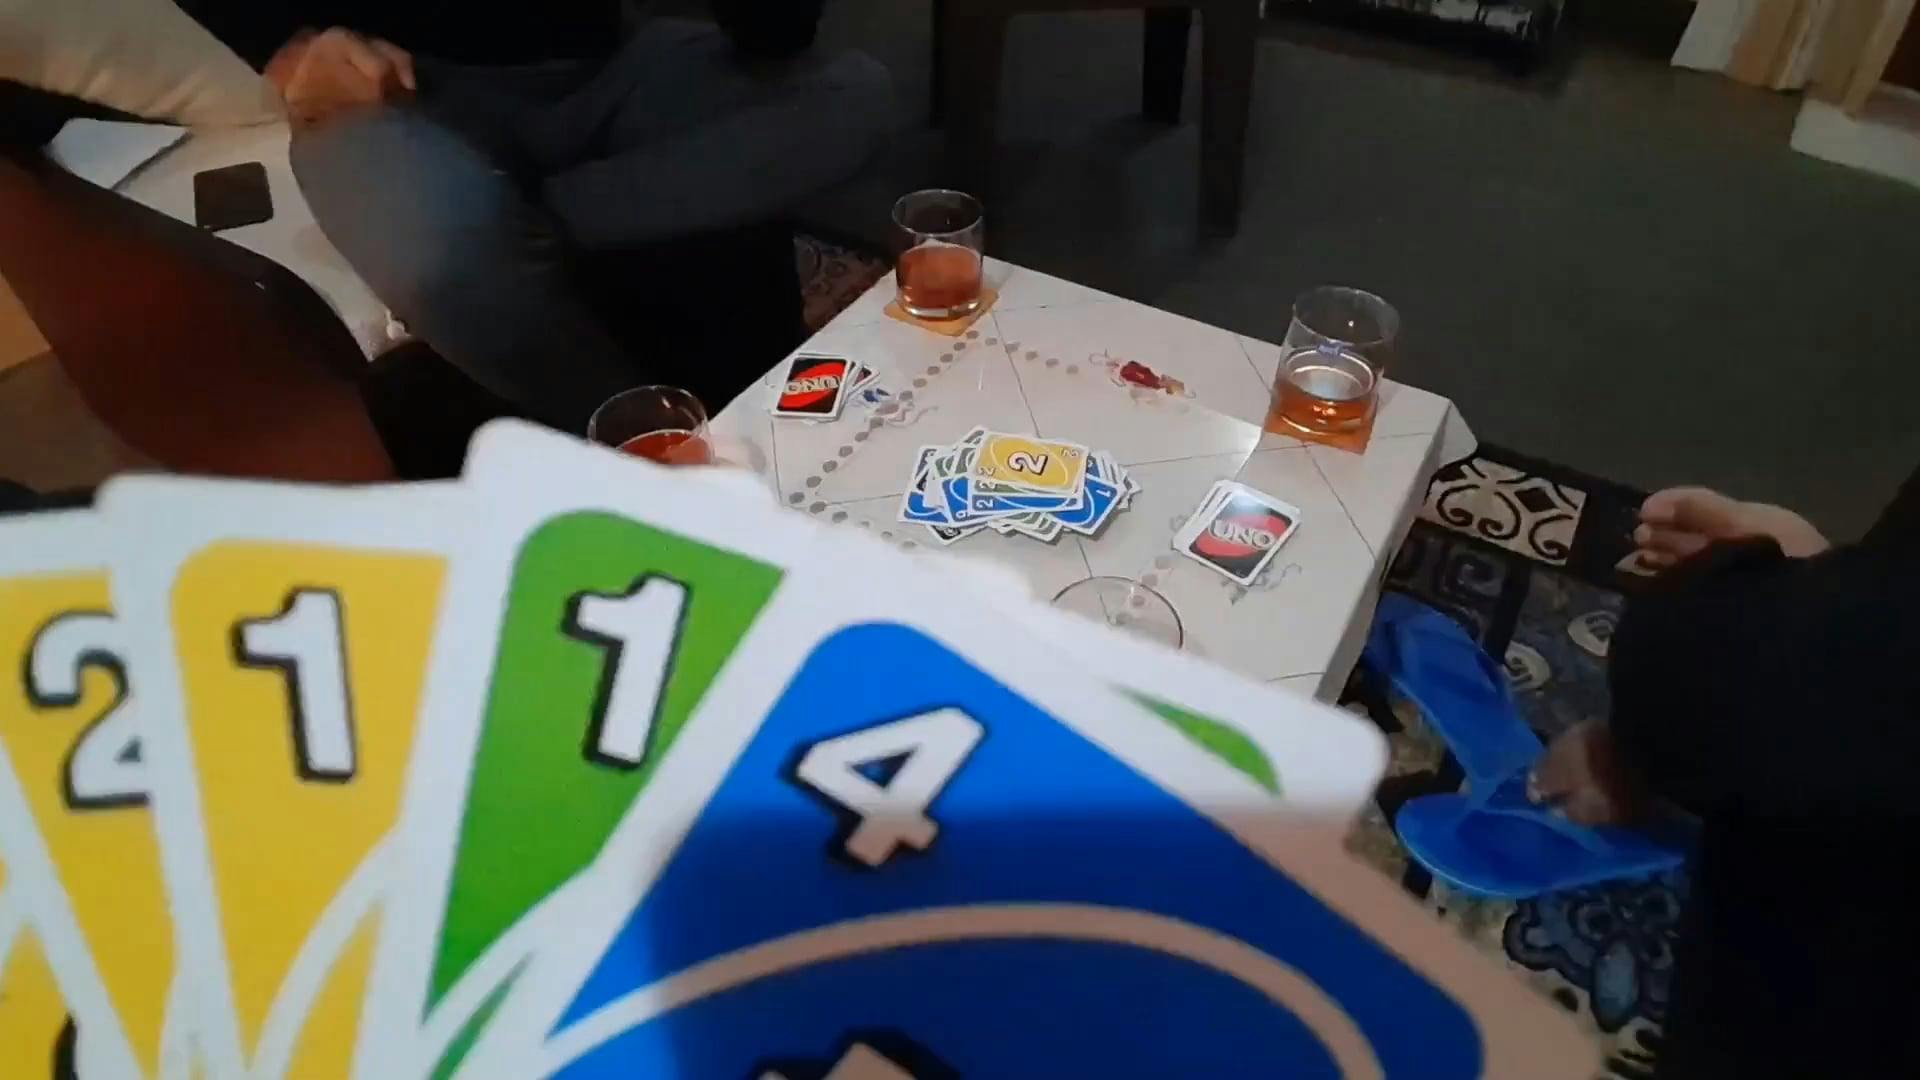 playing uno online with friends